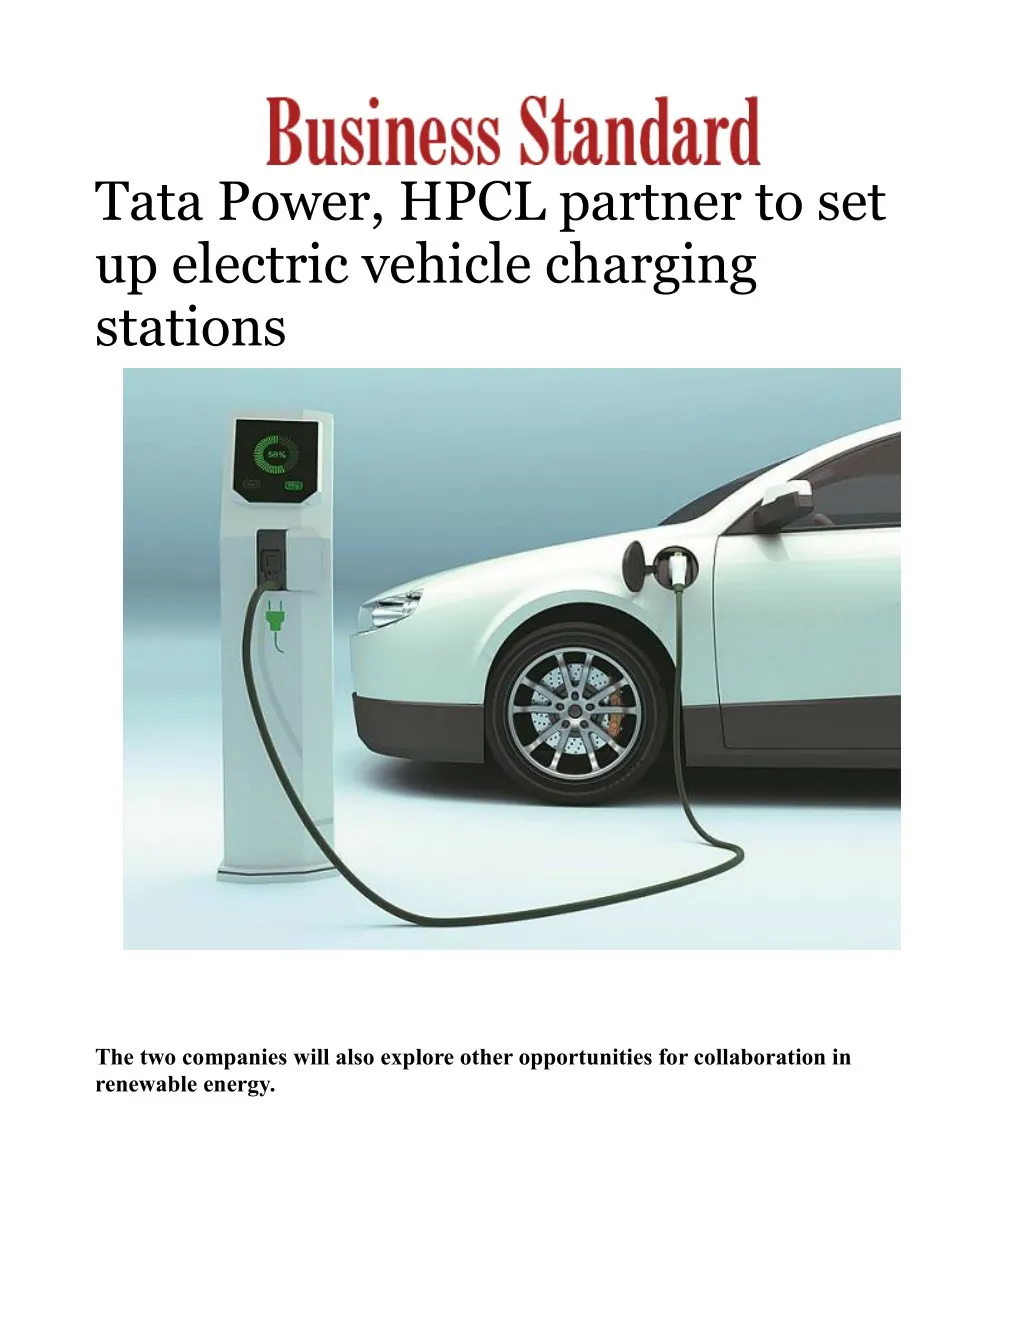 tata power hpcl partner to set up electric